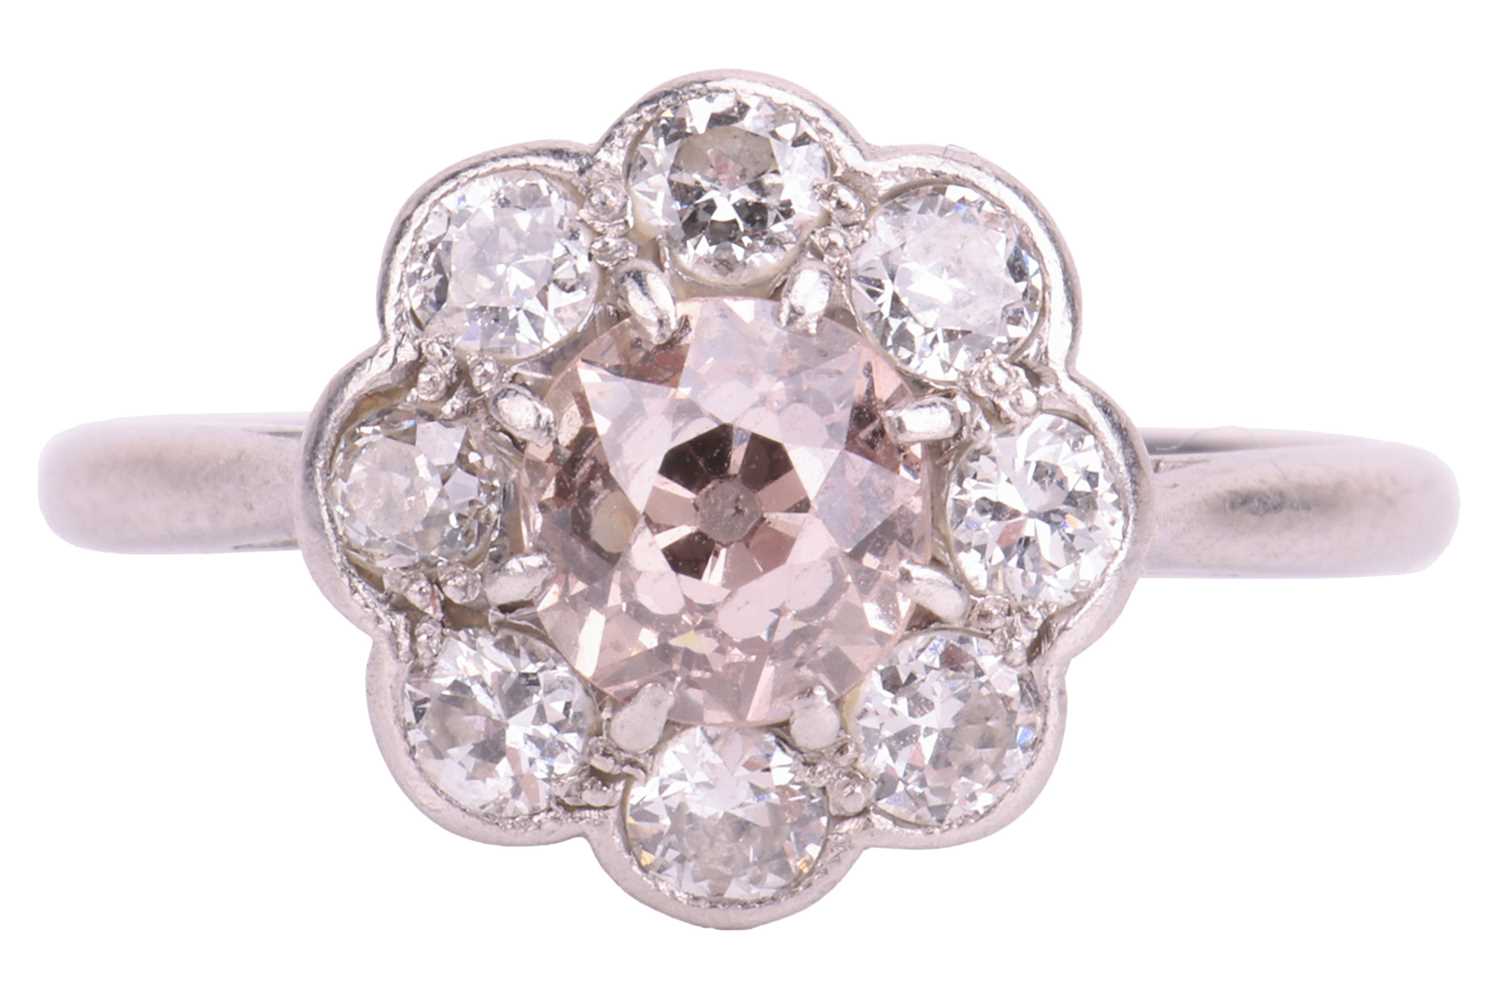 An Edwardian diamond daisy cluster ring, centred with an old European round diamond of "Very Light P